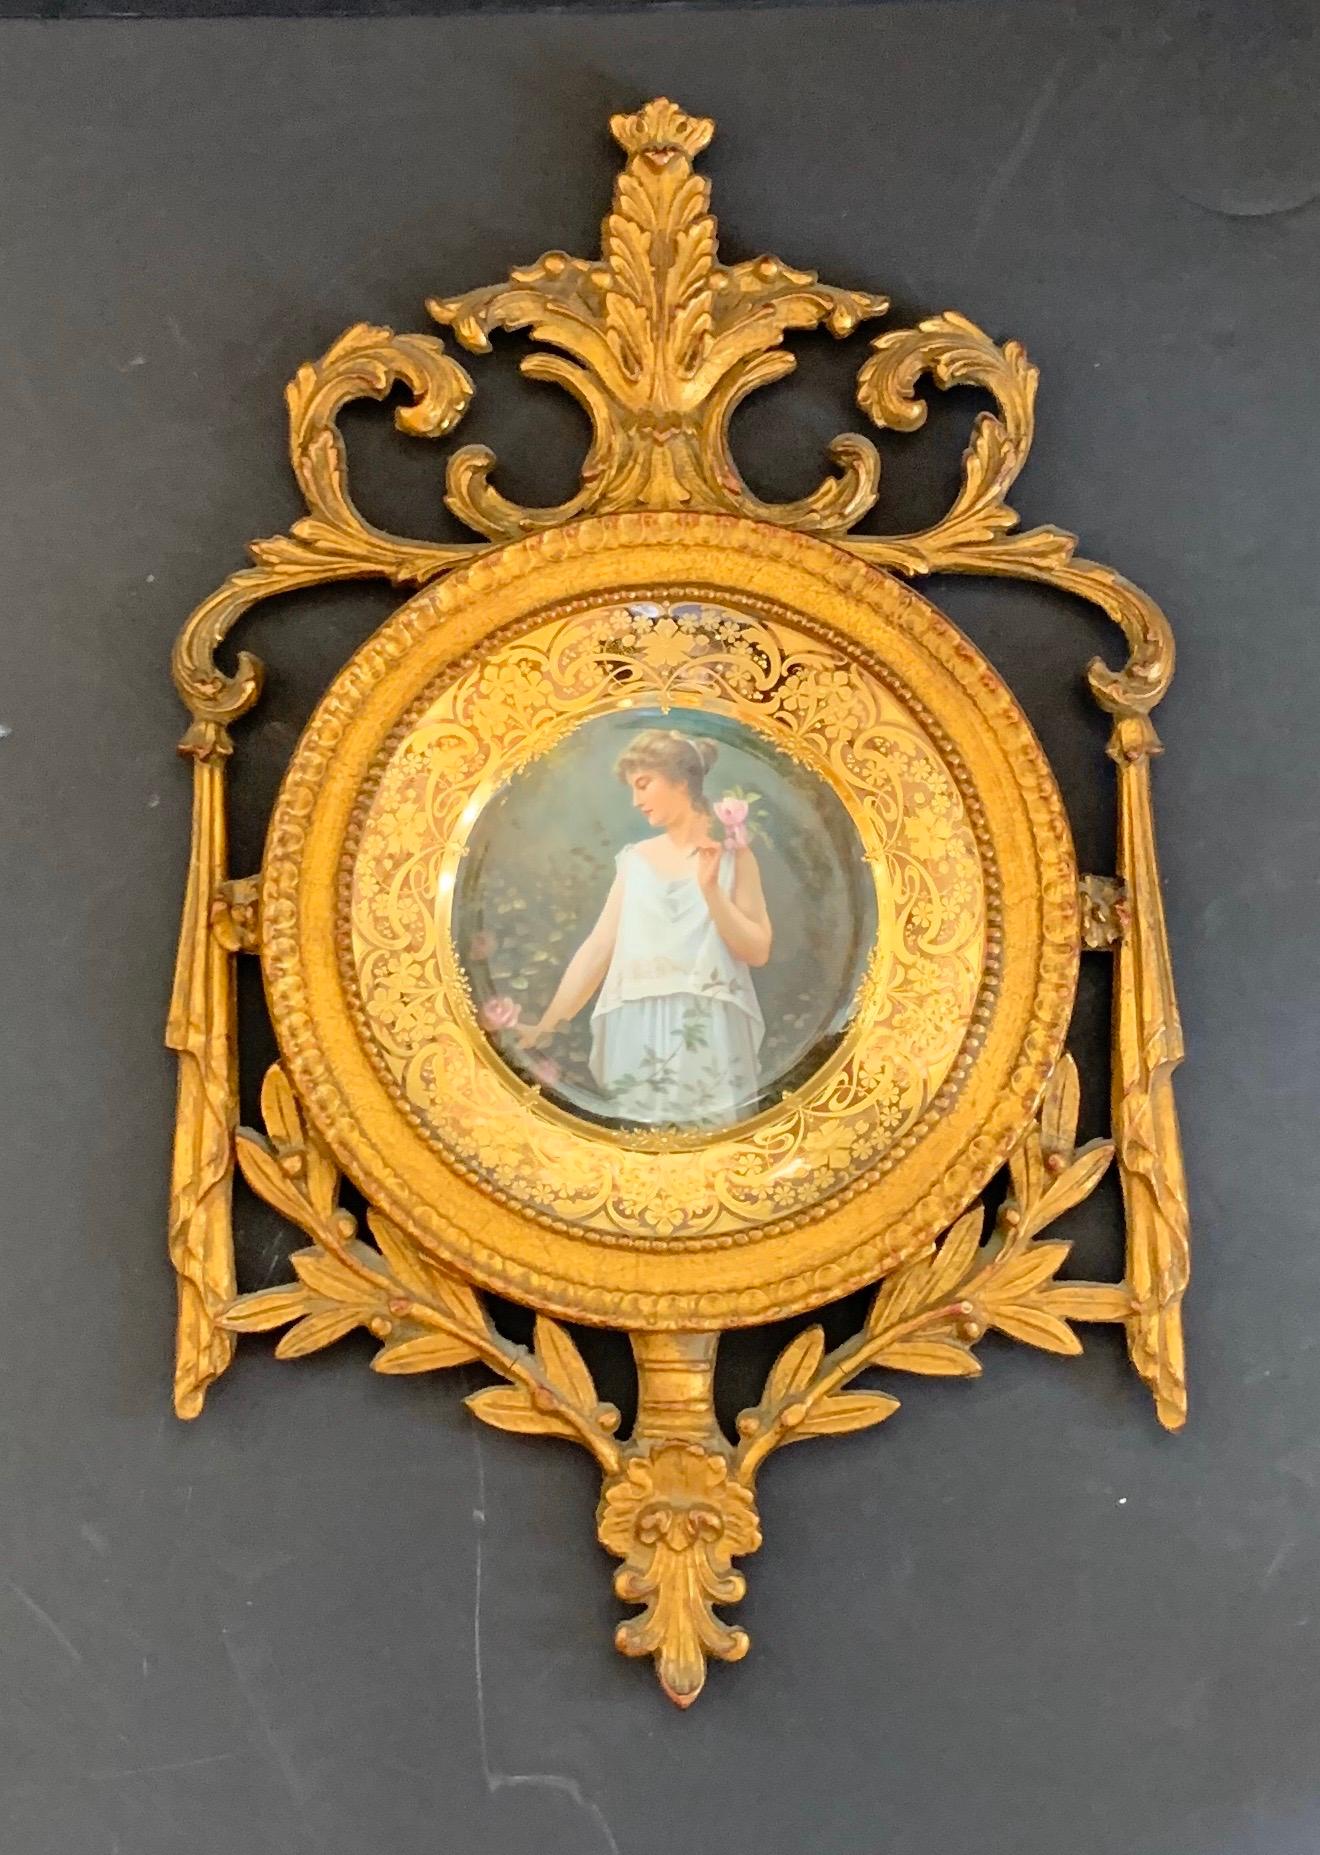 Wonderful Royal Vienna Porcelain portrait plate giltwood frame
Signed on the back Unter Rosen with a Bee Hive and Germany below.